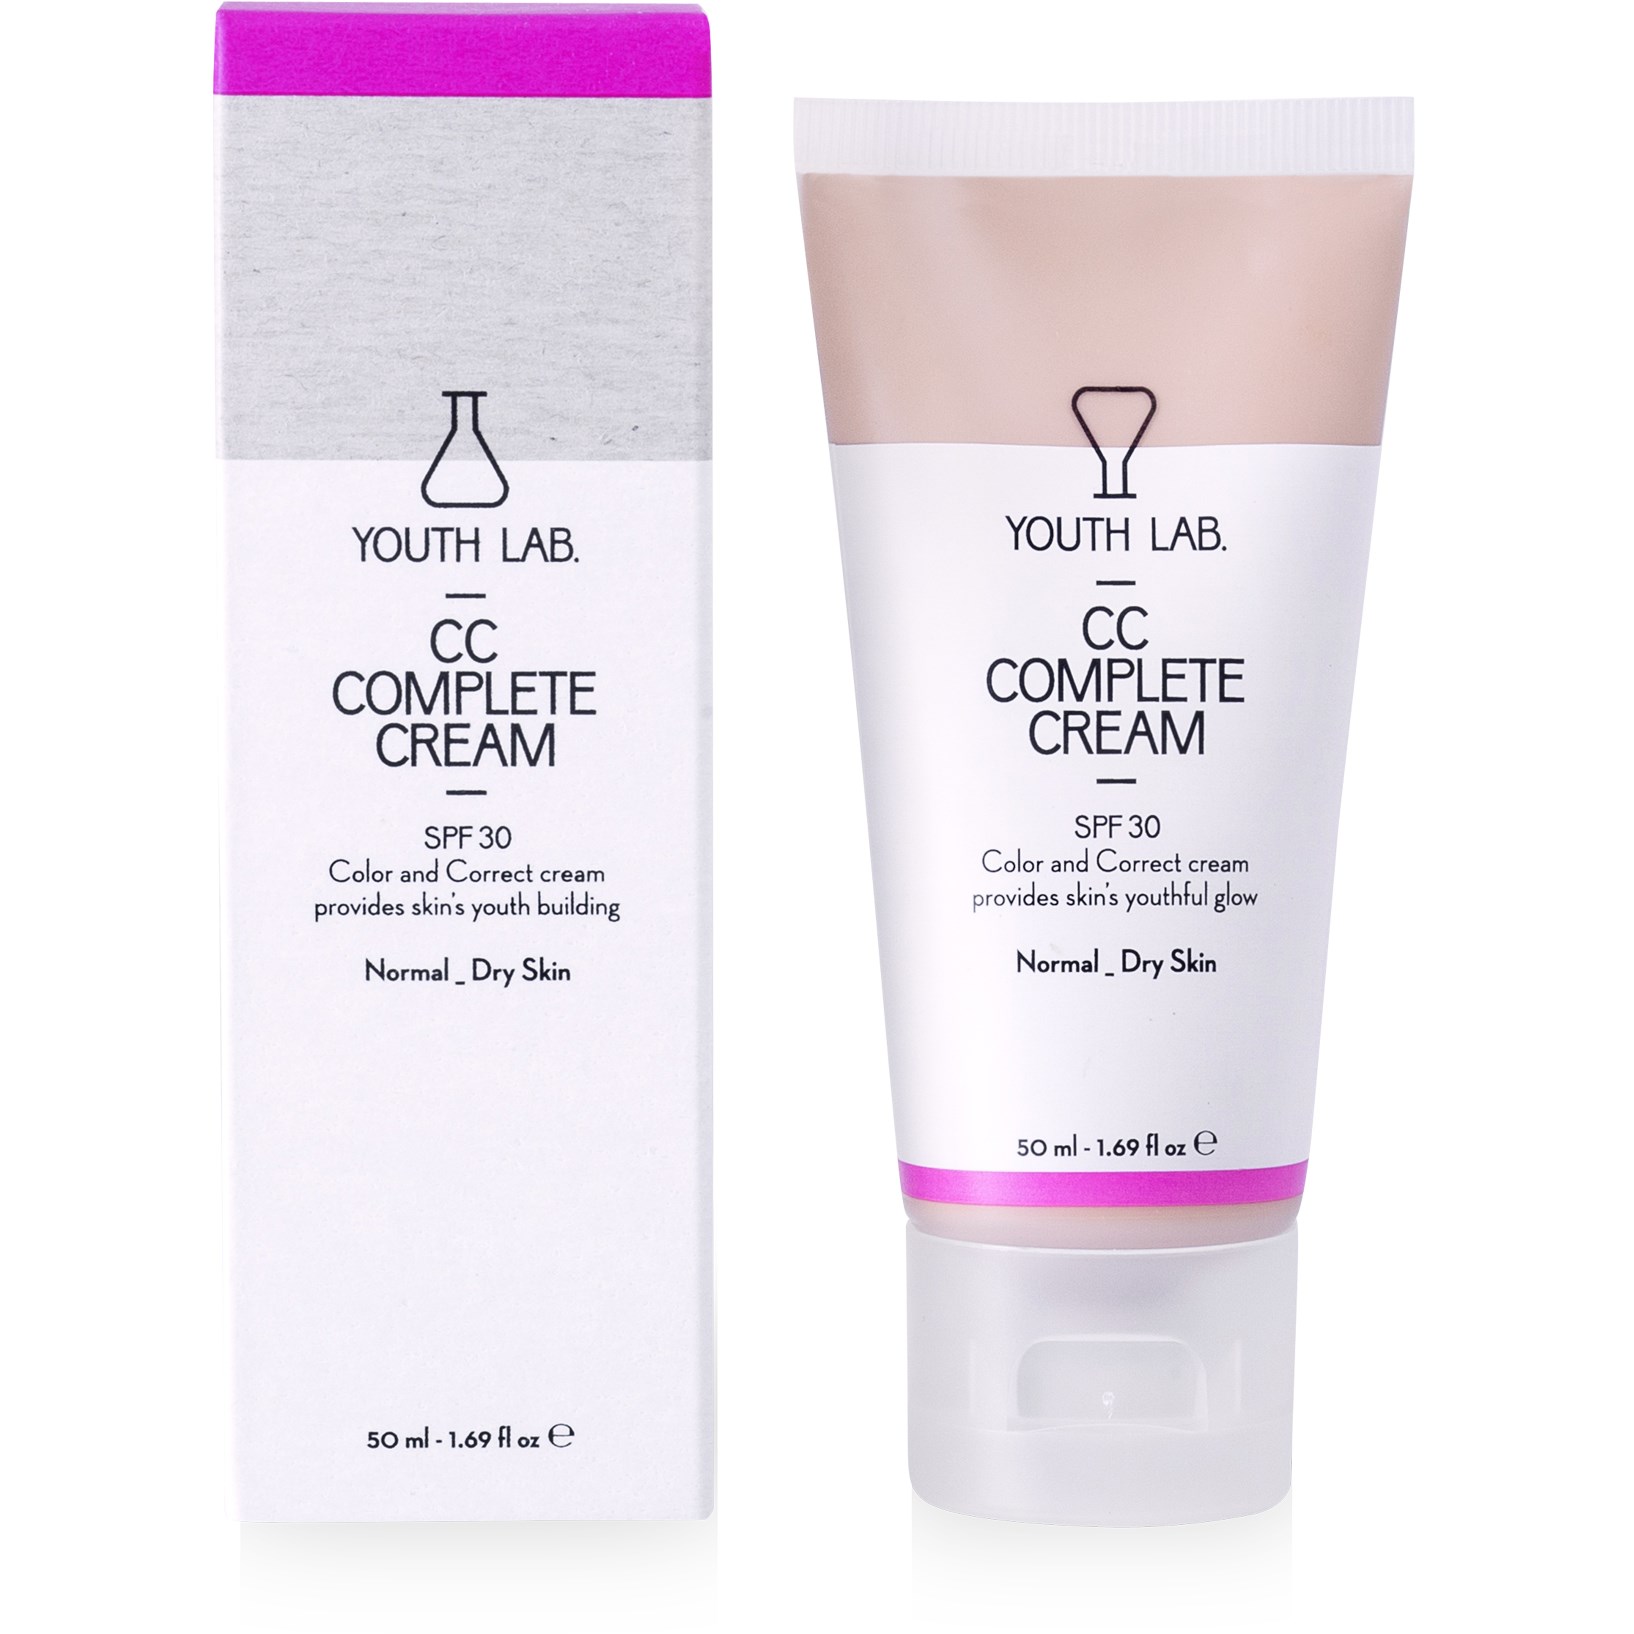 Youth Lab CC Complete Cream Spf 30 Normal Skin 50 ml